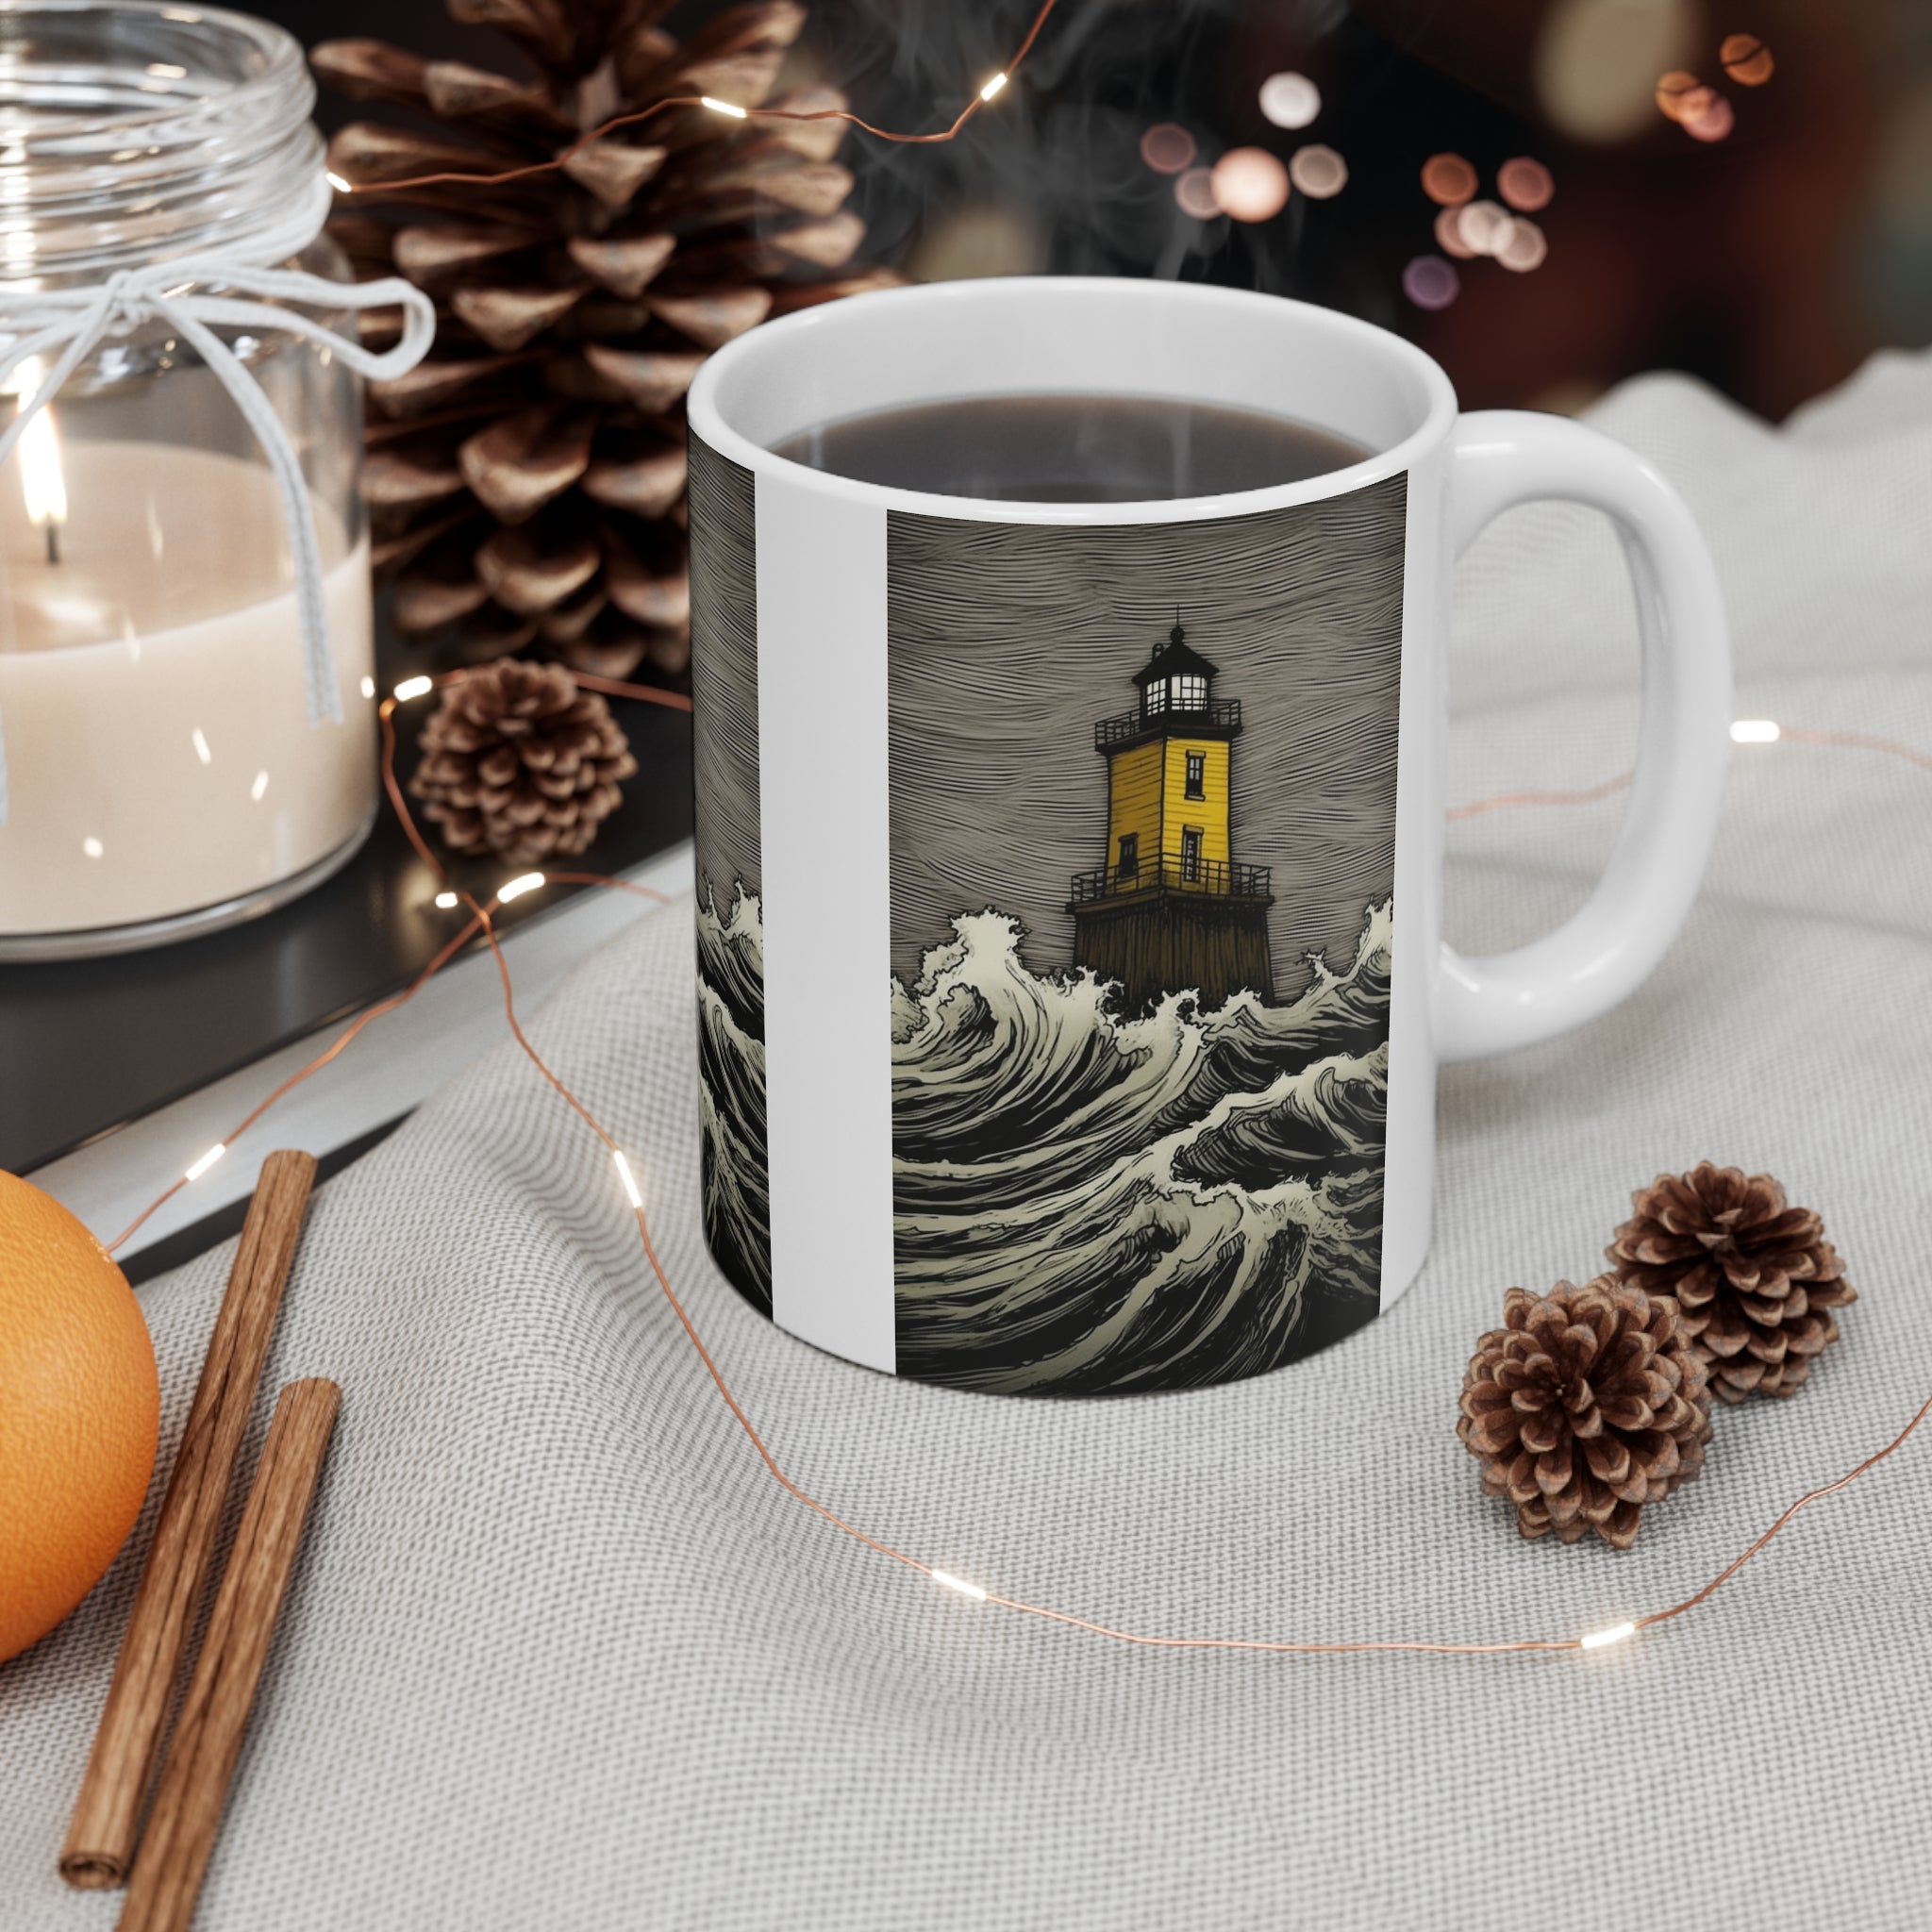 Perfect for Relaxing and Sipping Tea or Coffee "Yellow Sunflower Lighthouse Against the White Surf of the Bay" Ceramic Mug 11oz - Coastal Art and Relaxation & Nautical Painting for Coffee Lovers Gift for Teachers Gift for Employees or Boss